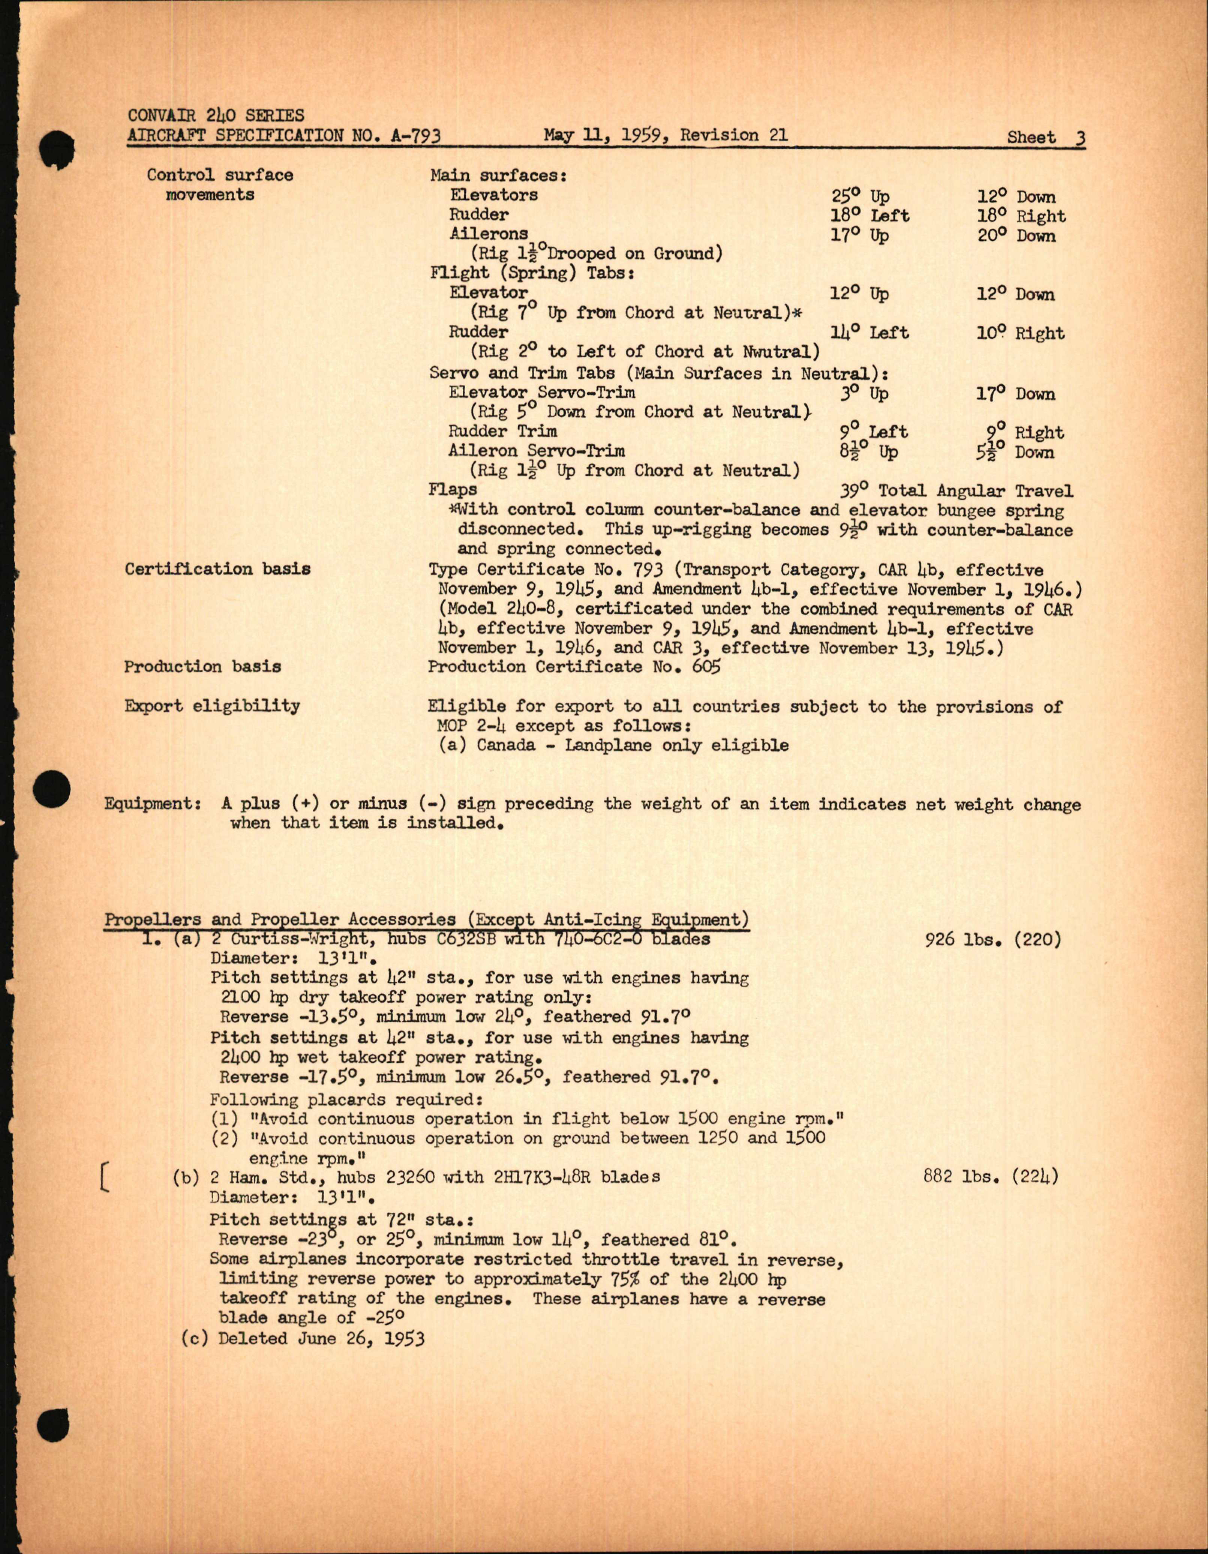 Sample page 5 from AirCorps Library document: Convair 240 Series 